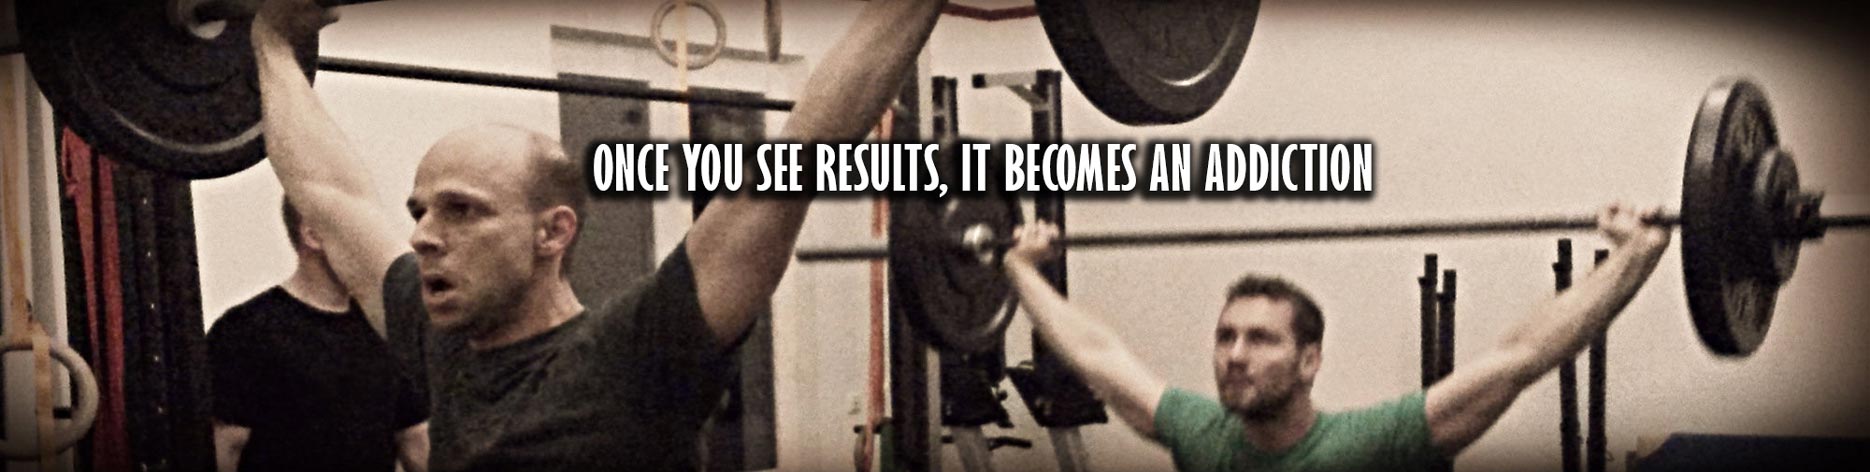 Once you see results, it becomes an addiction.